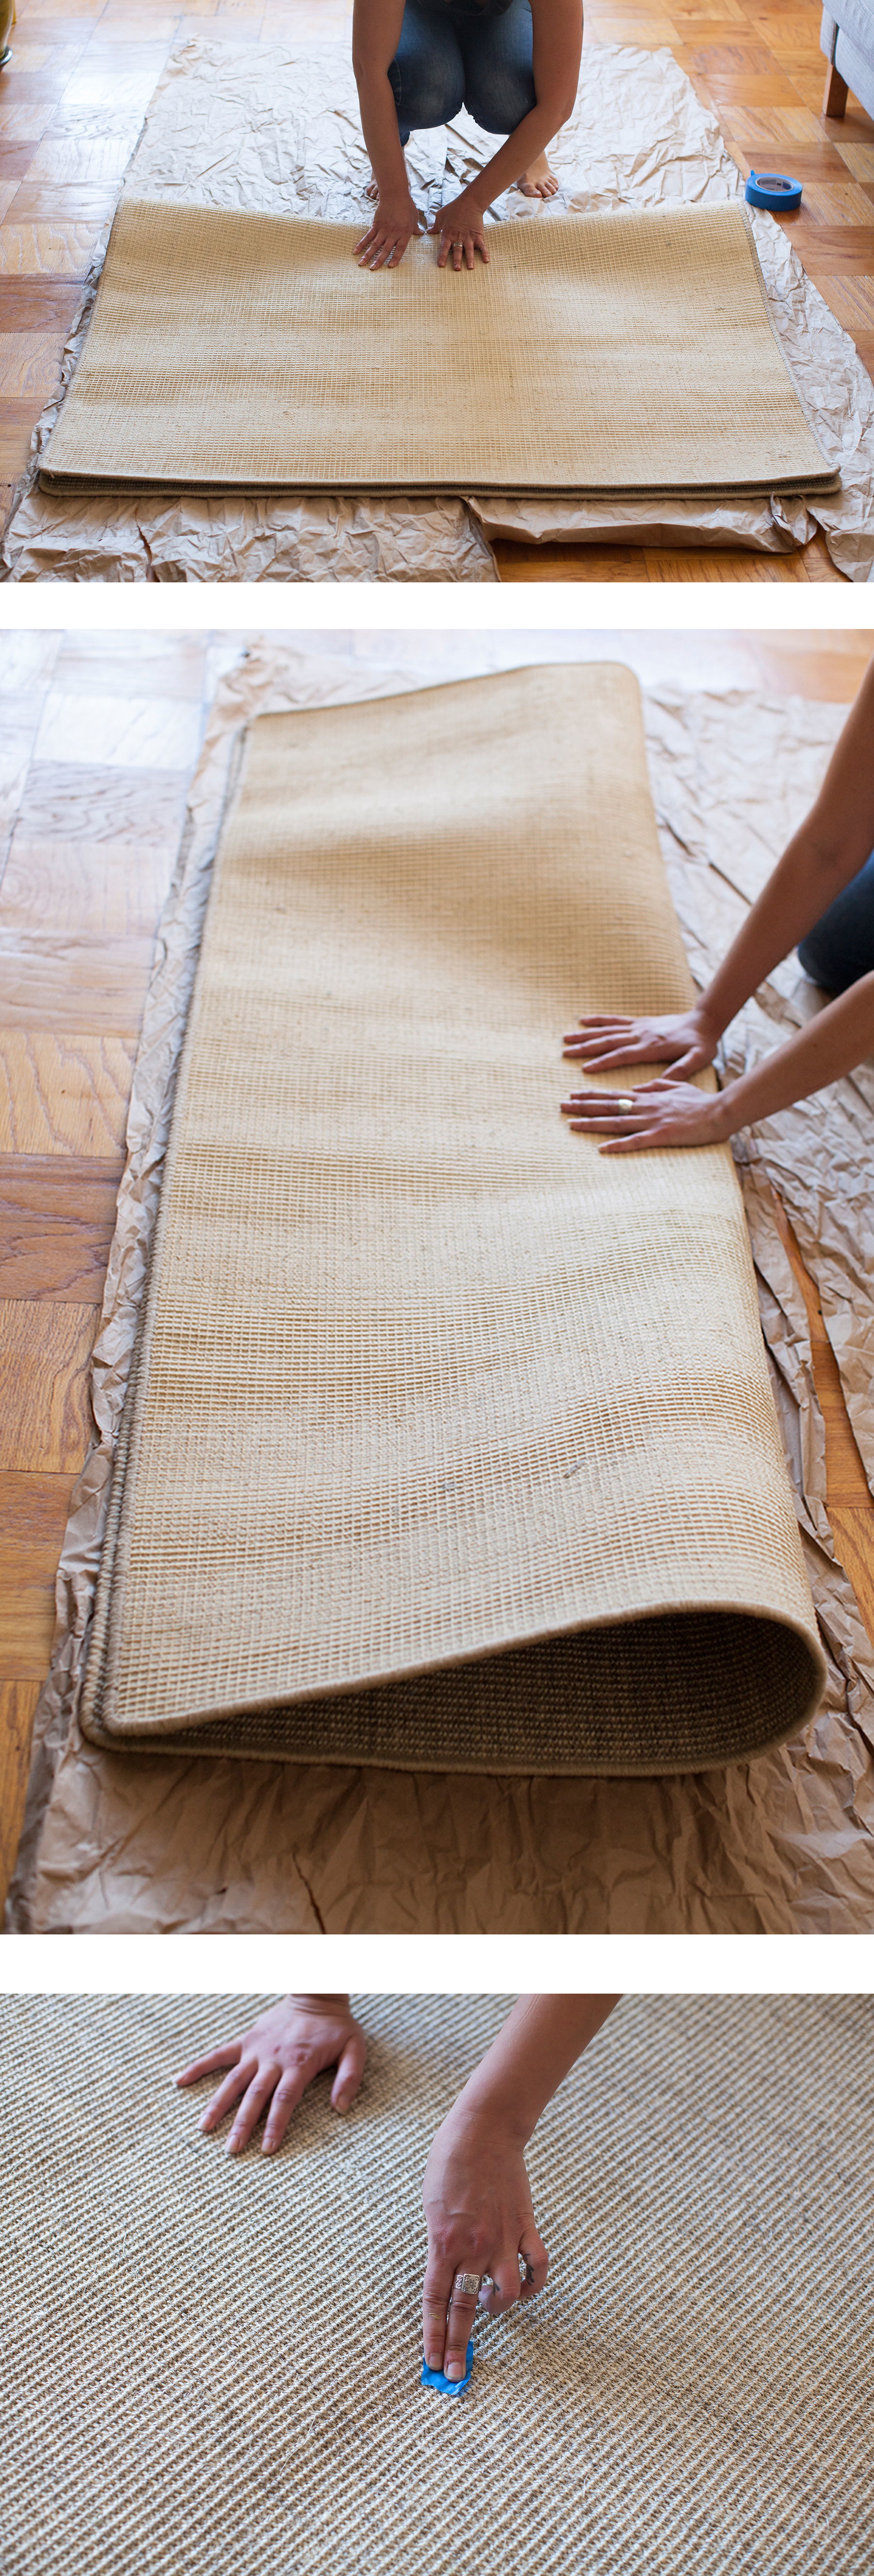 Step 1: Fold the rug in half by length and width to determine the center point. You may also use a tape measure if your rug isn’t pliable enough to bend. Mark it with a piece of tape.